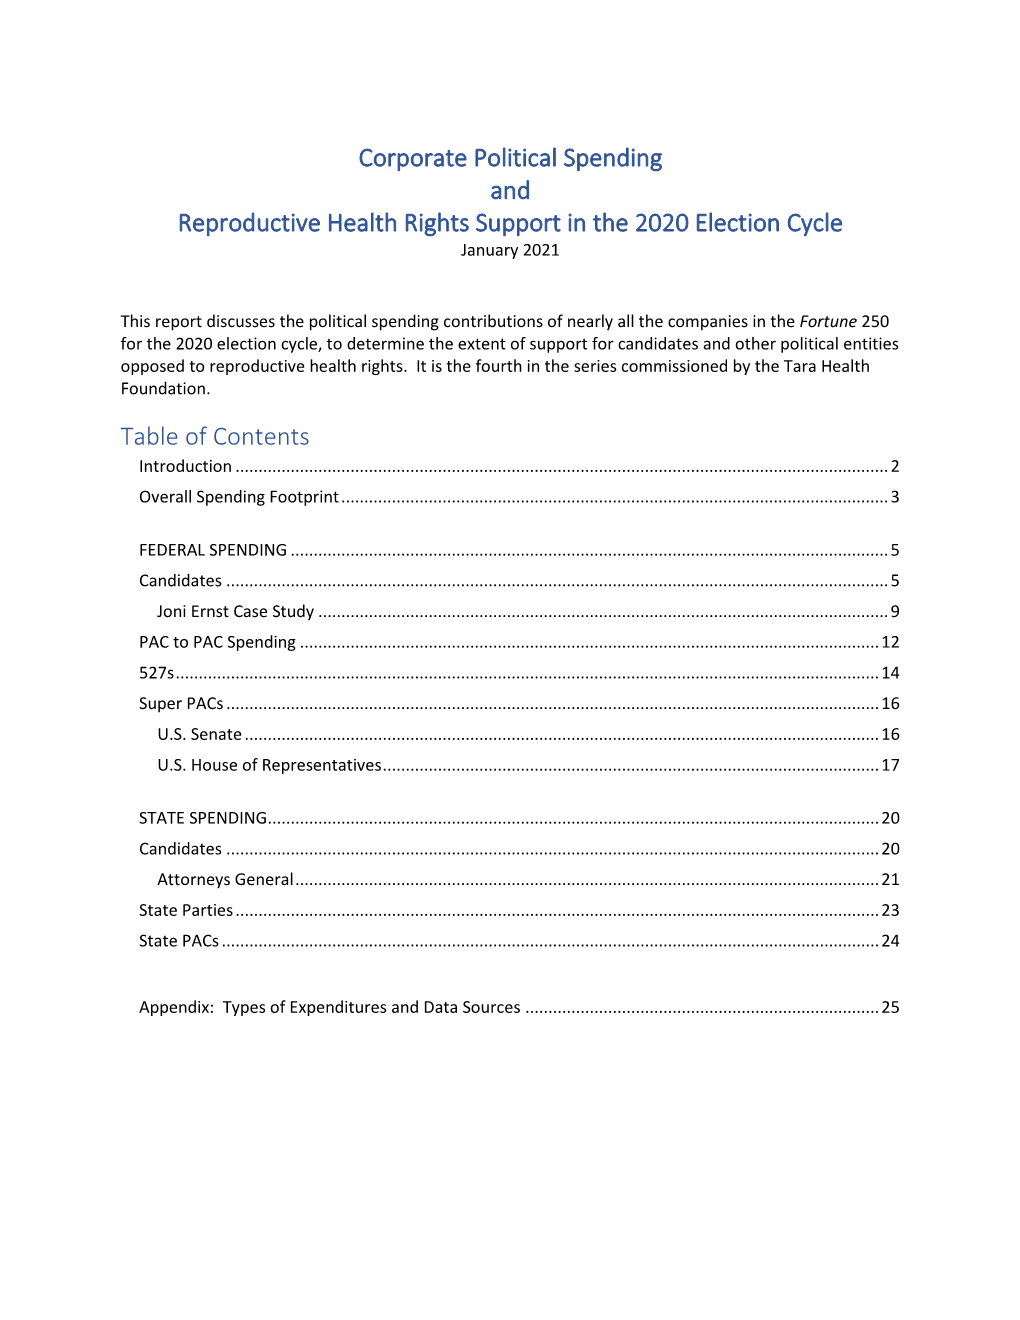 Corporate Political Spending and Reproductive Health Rights Support in the 2020 Election Cycle January 2021